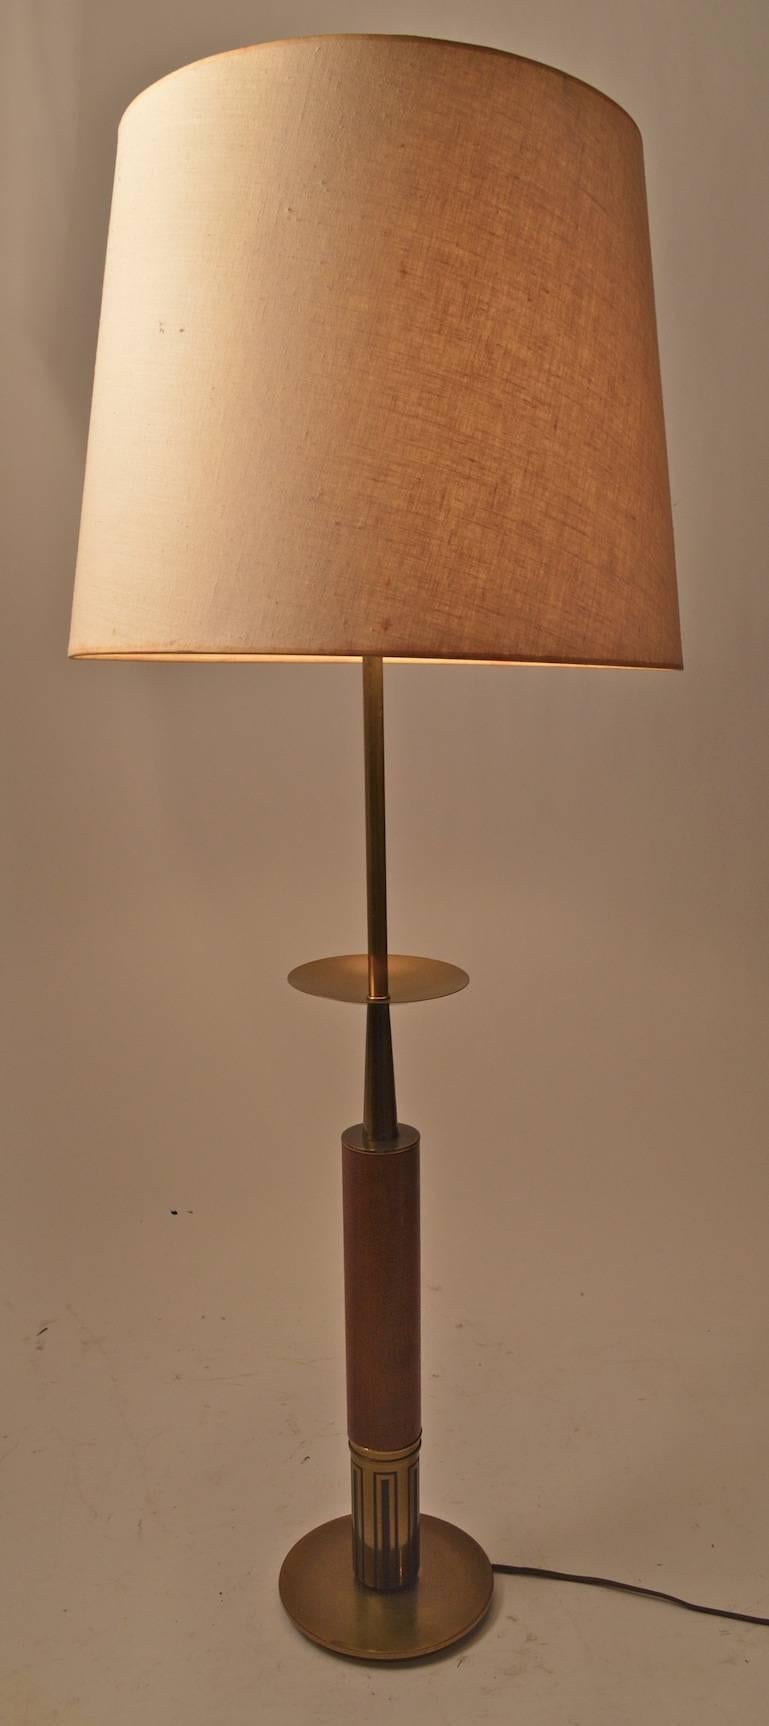 Walnut and brass table lamp, design after Parzinger. Height to brass disk 22.5